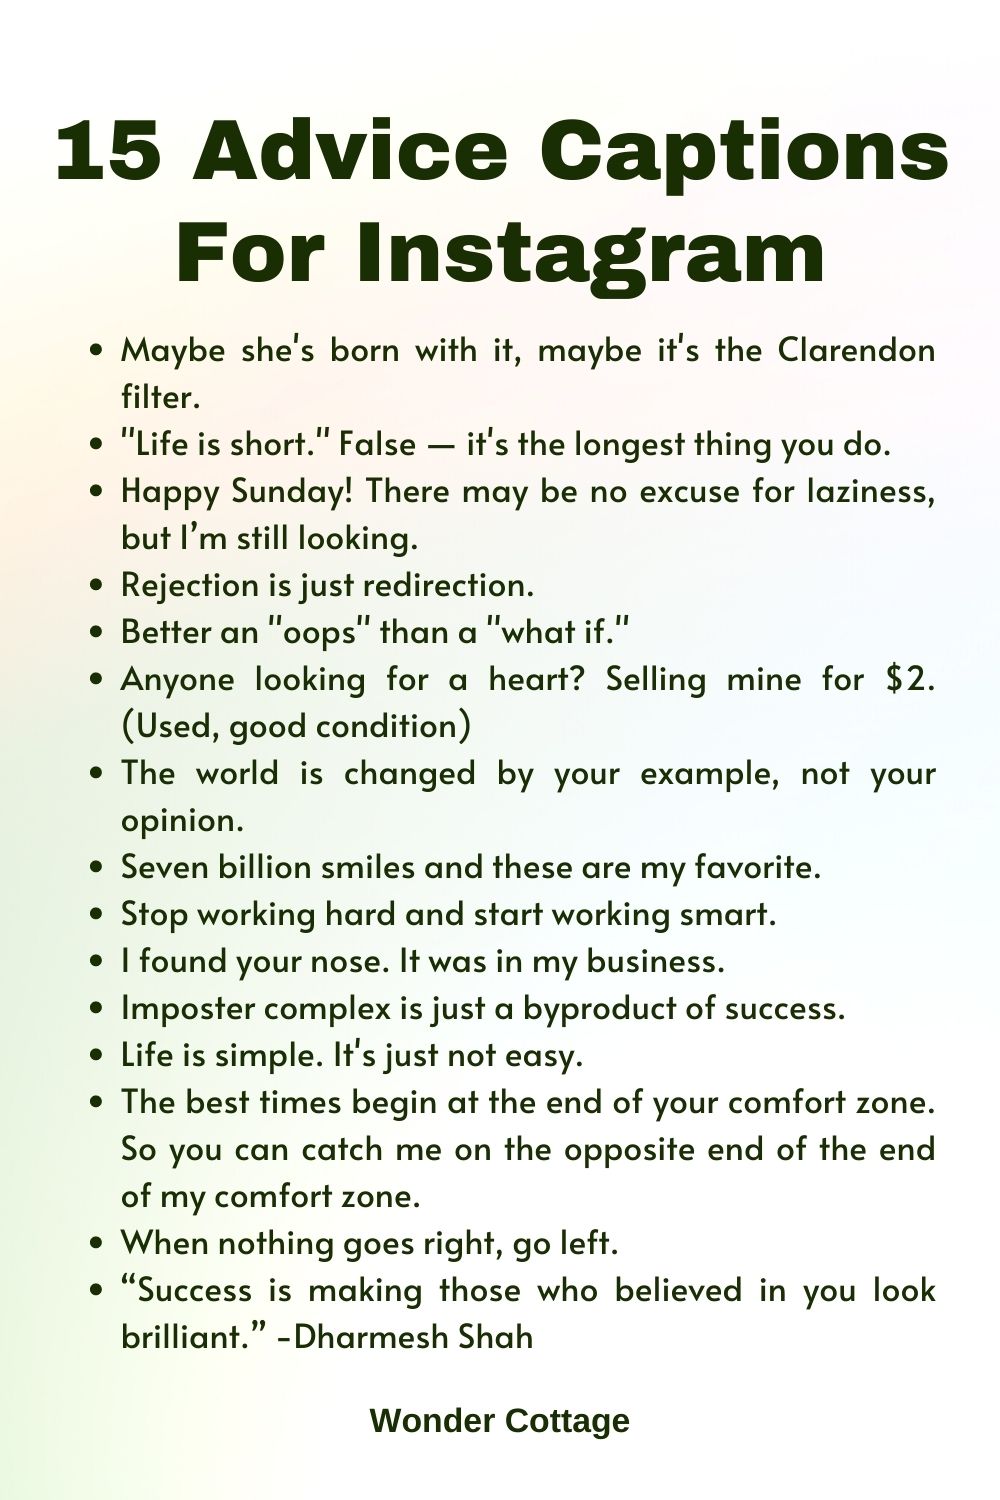 15 Advice Captions For Instagram